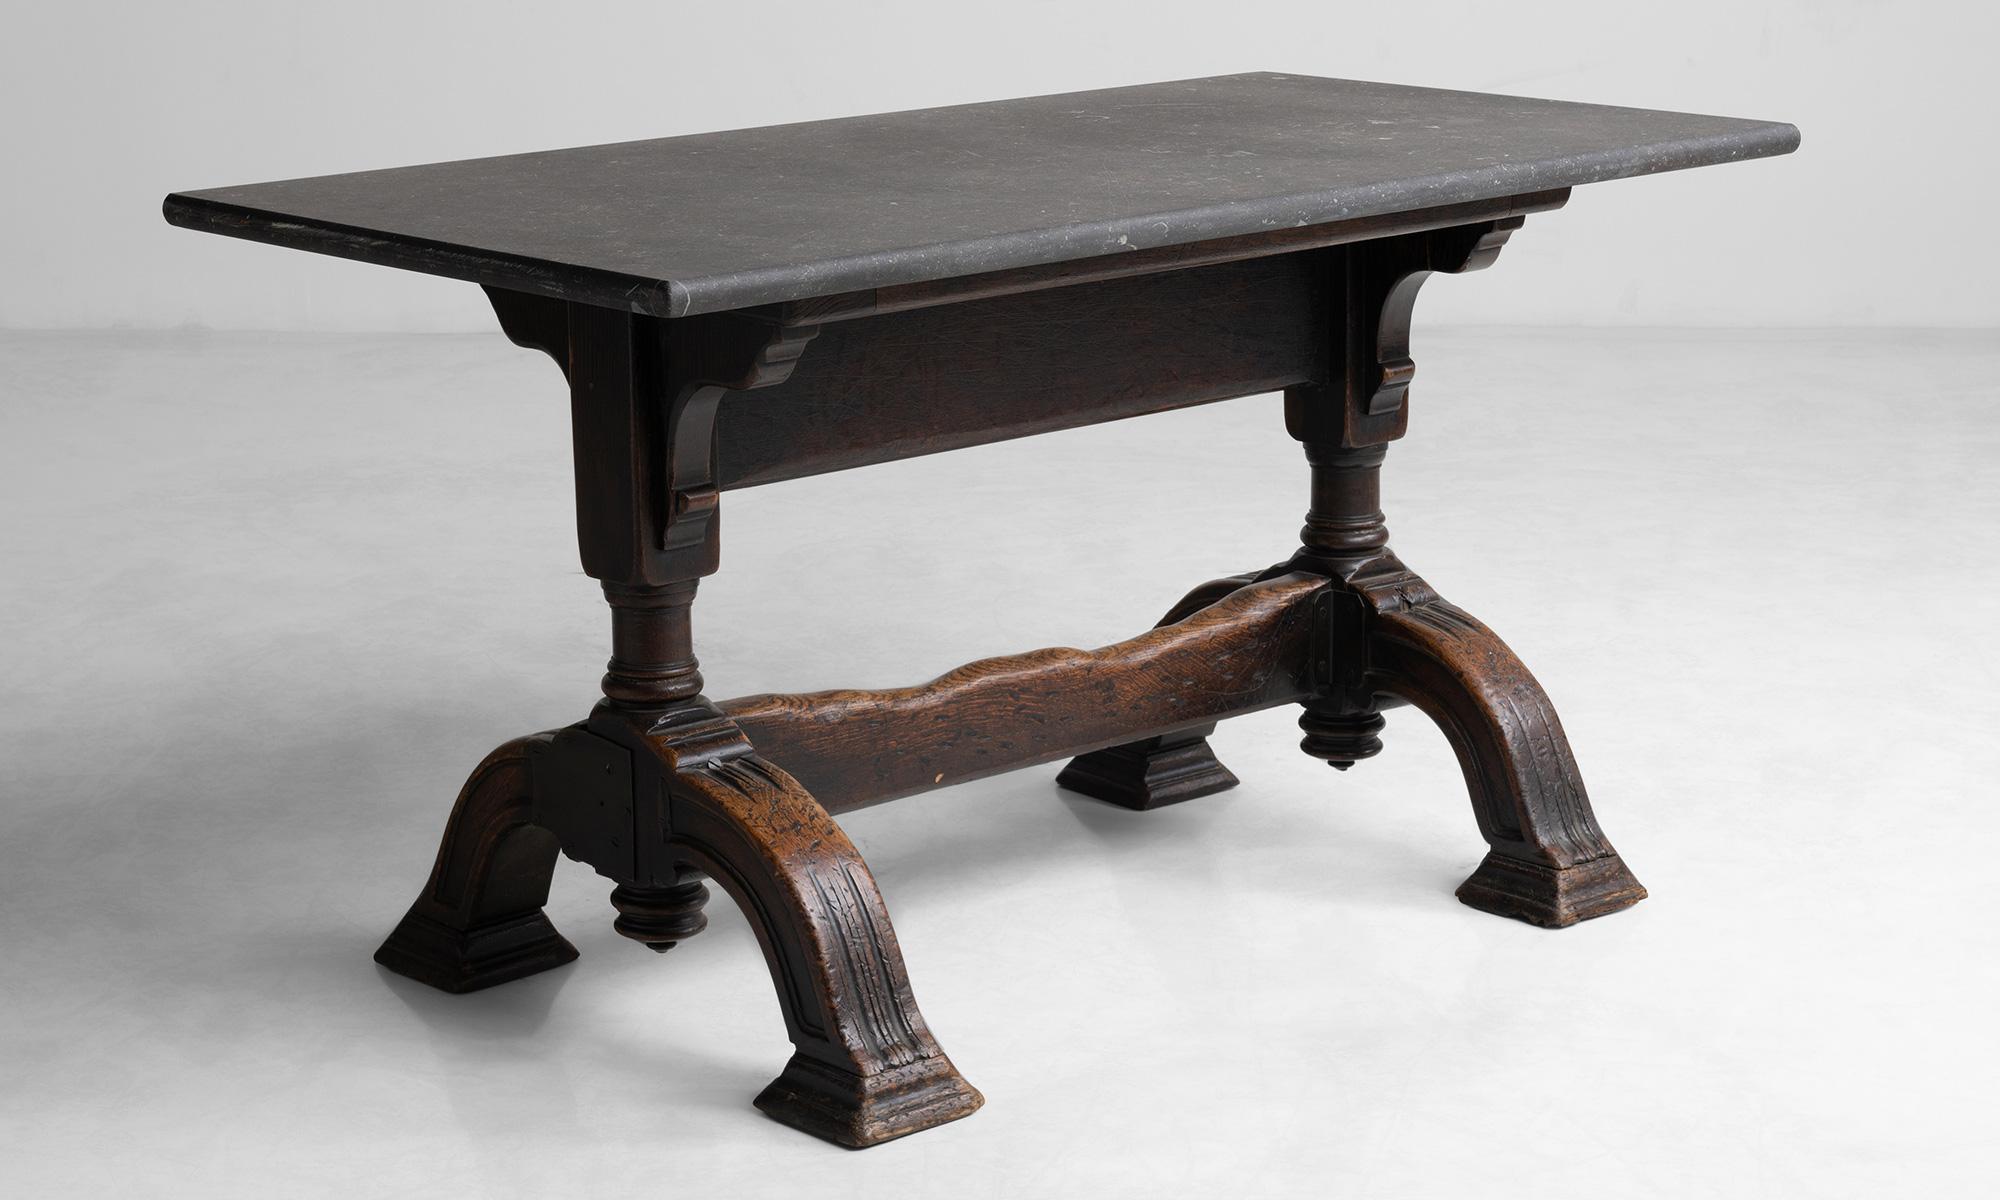 Stone & Carved wood side table

France circa 1870

Beautifully carved base with black stone top.

55.35